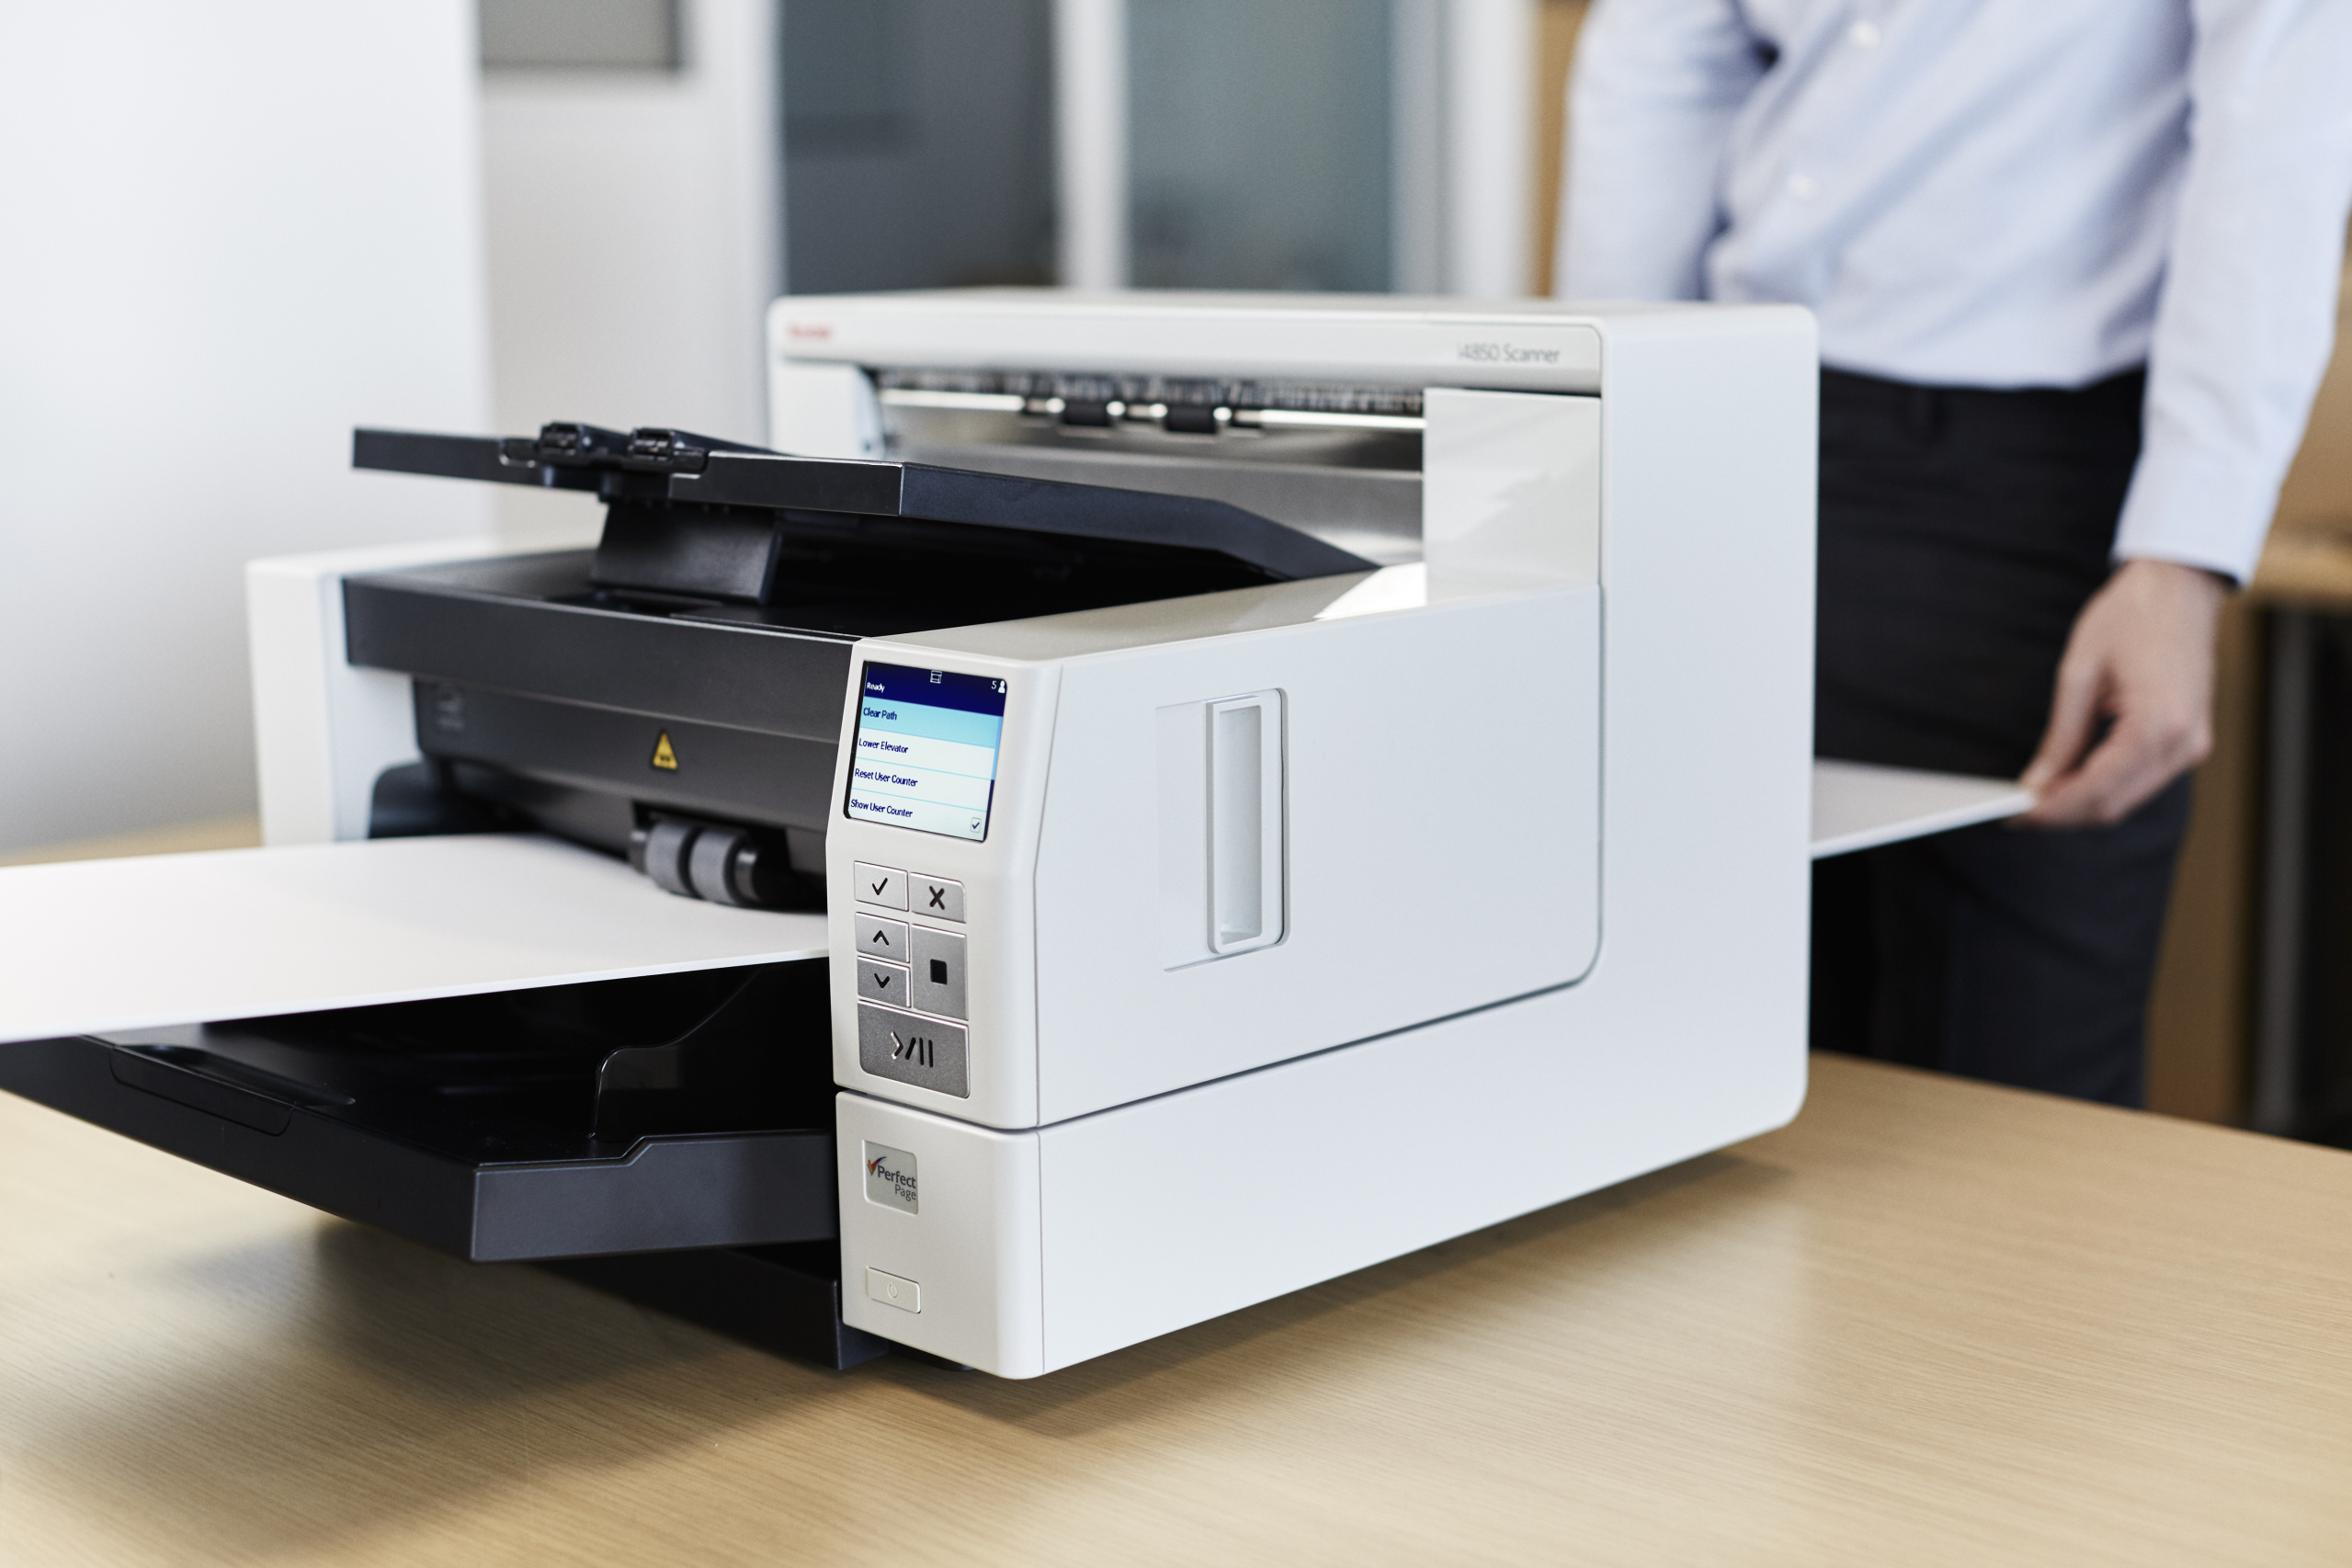 A3 SCANNER SPEED 160 PAGES PER MINUTE OR 320 IMAGES PER MINUTE